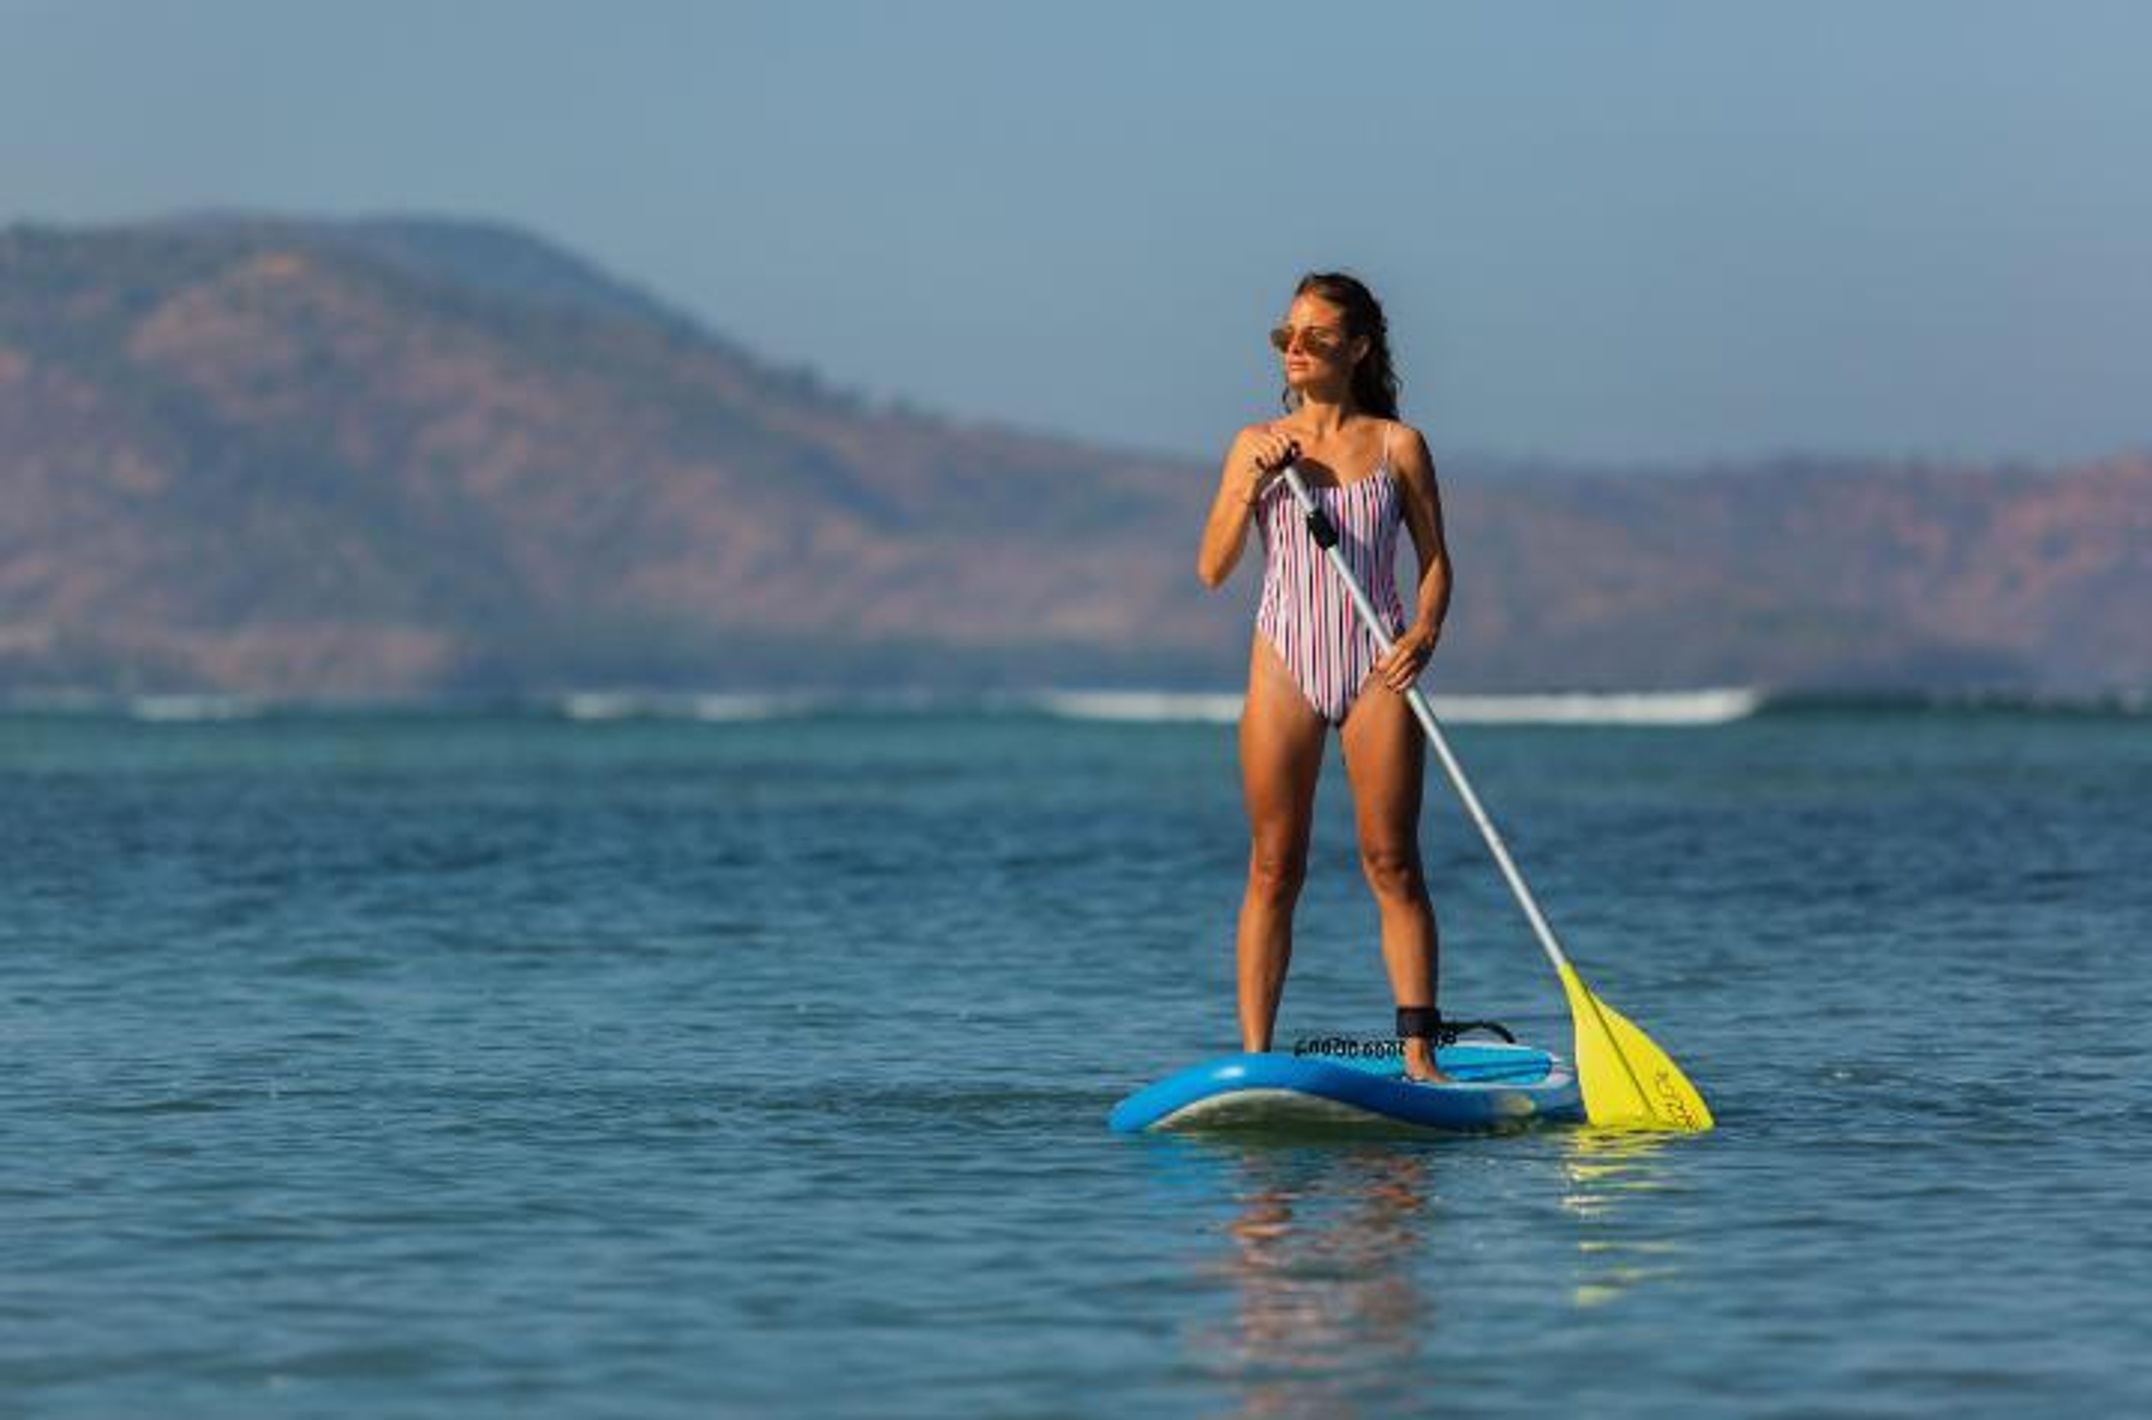 Woman on a blue stand-up paddleboard holding a yellow oar